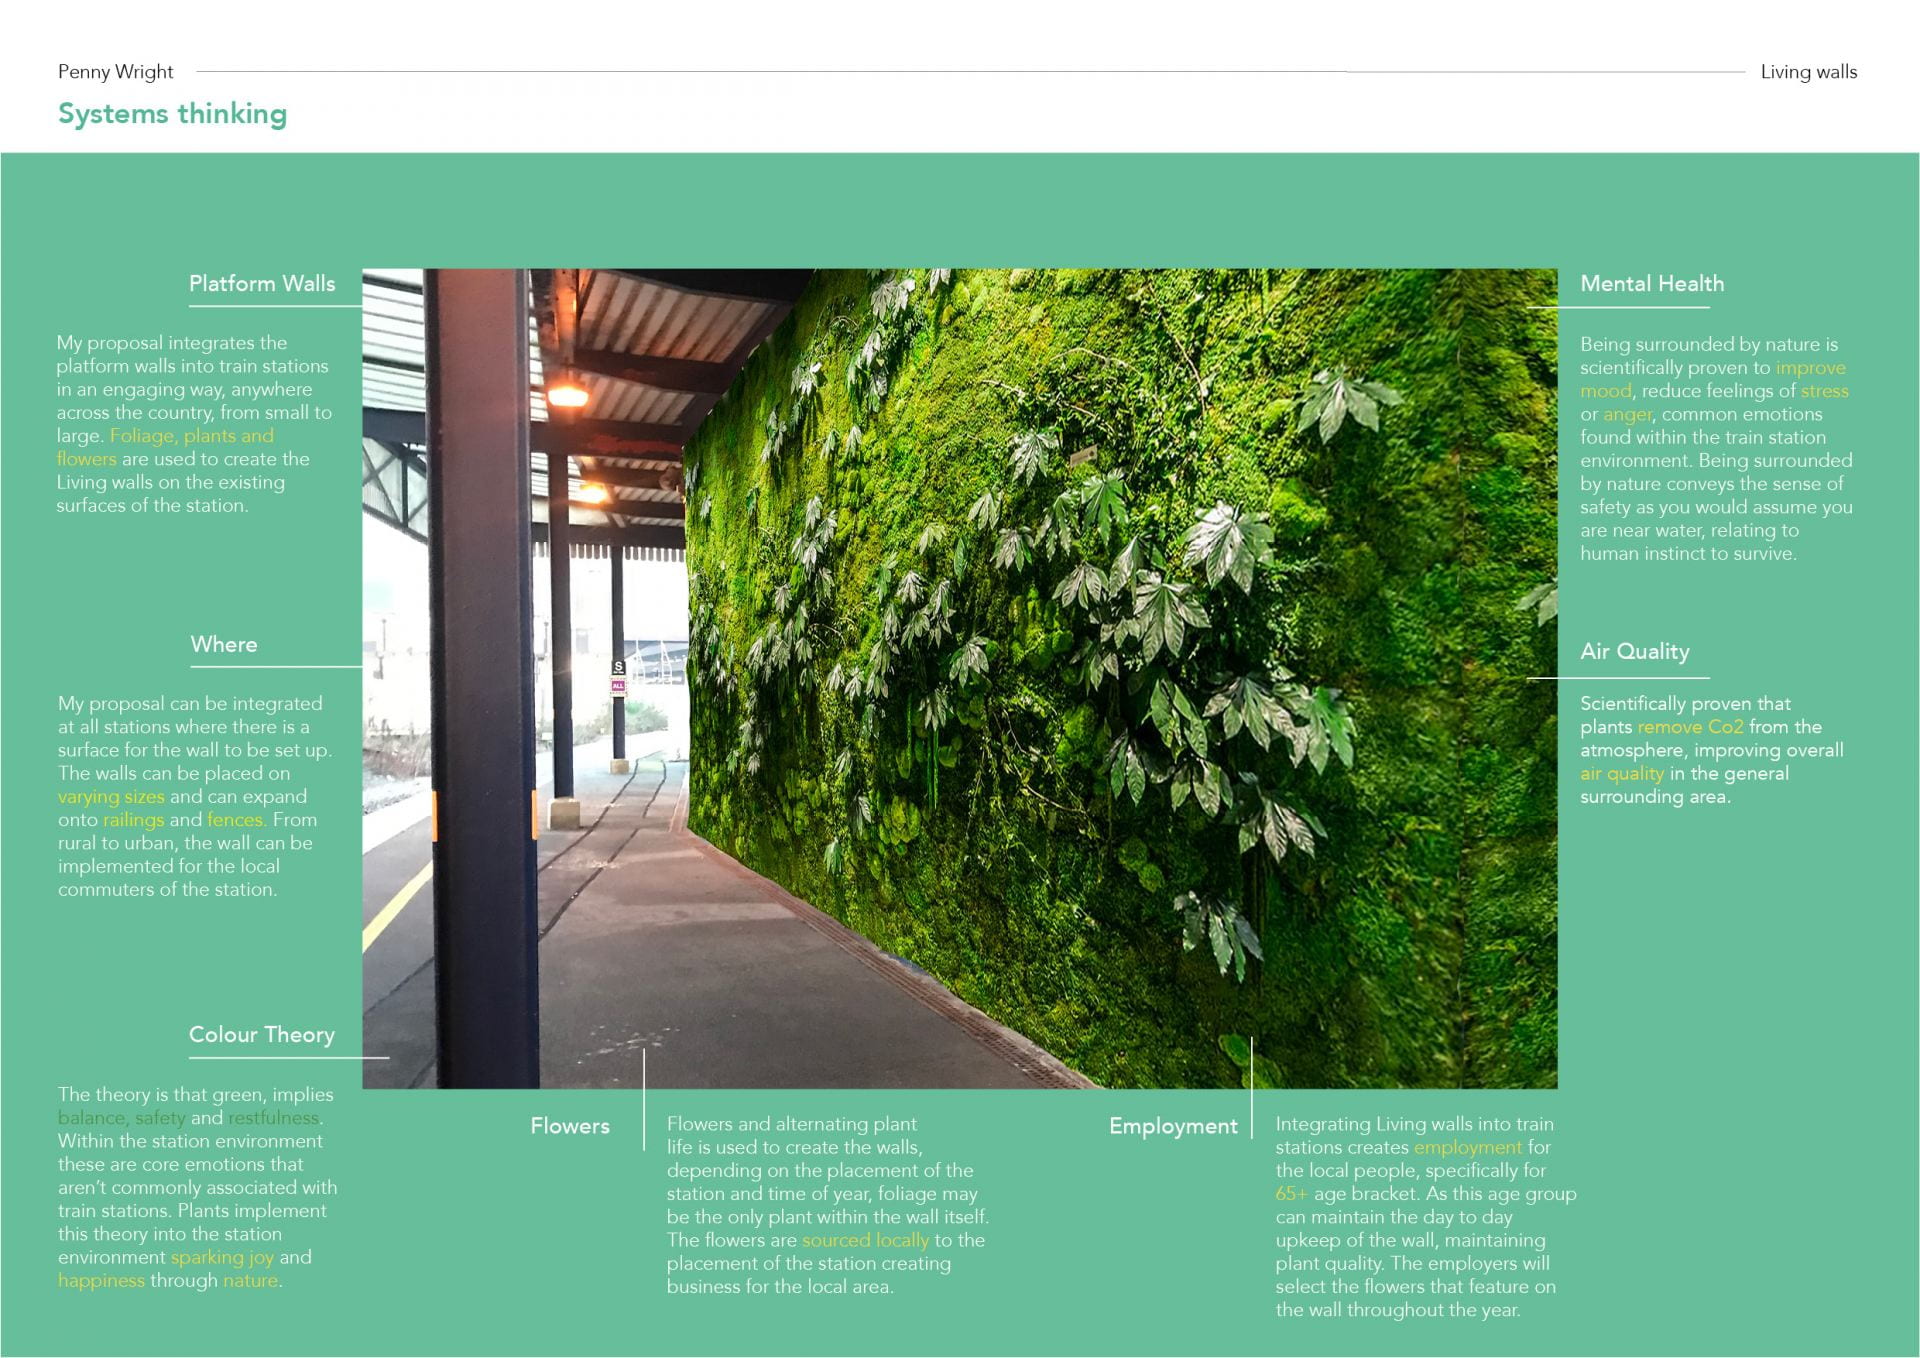 Presentation slide with an image of a train platform with greenery on a wall and information about the living walls project. 